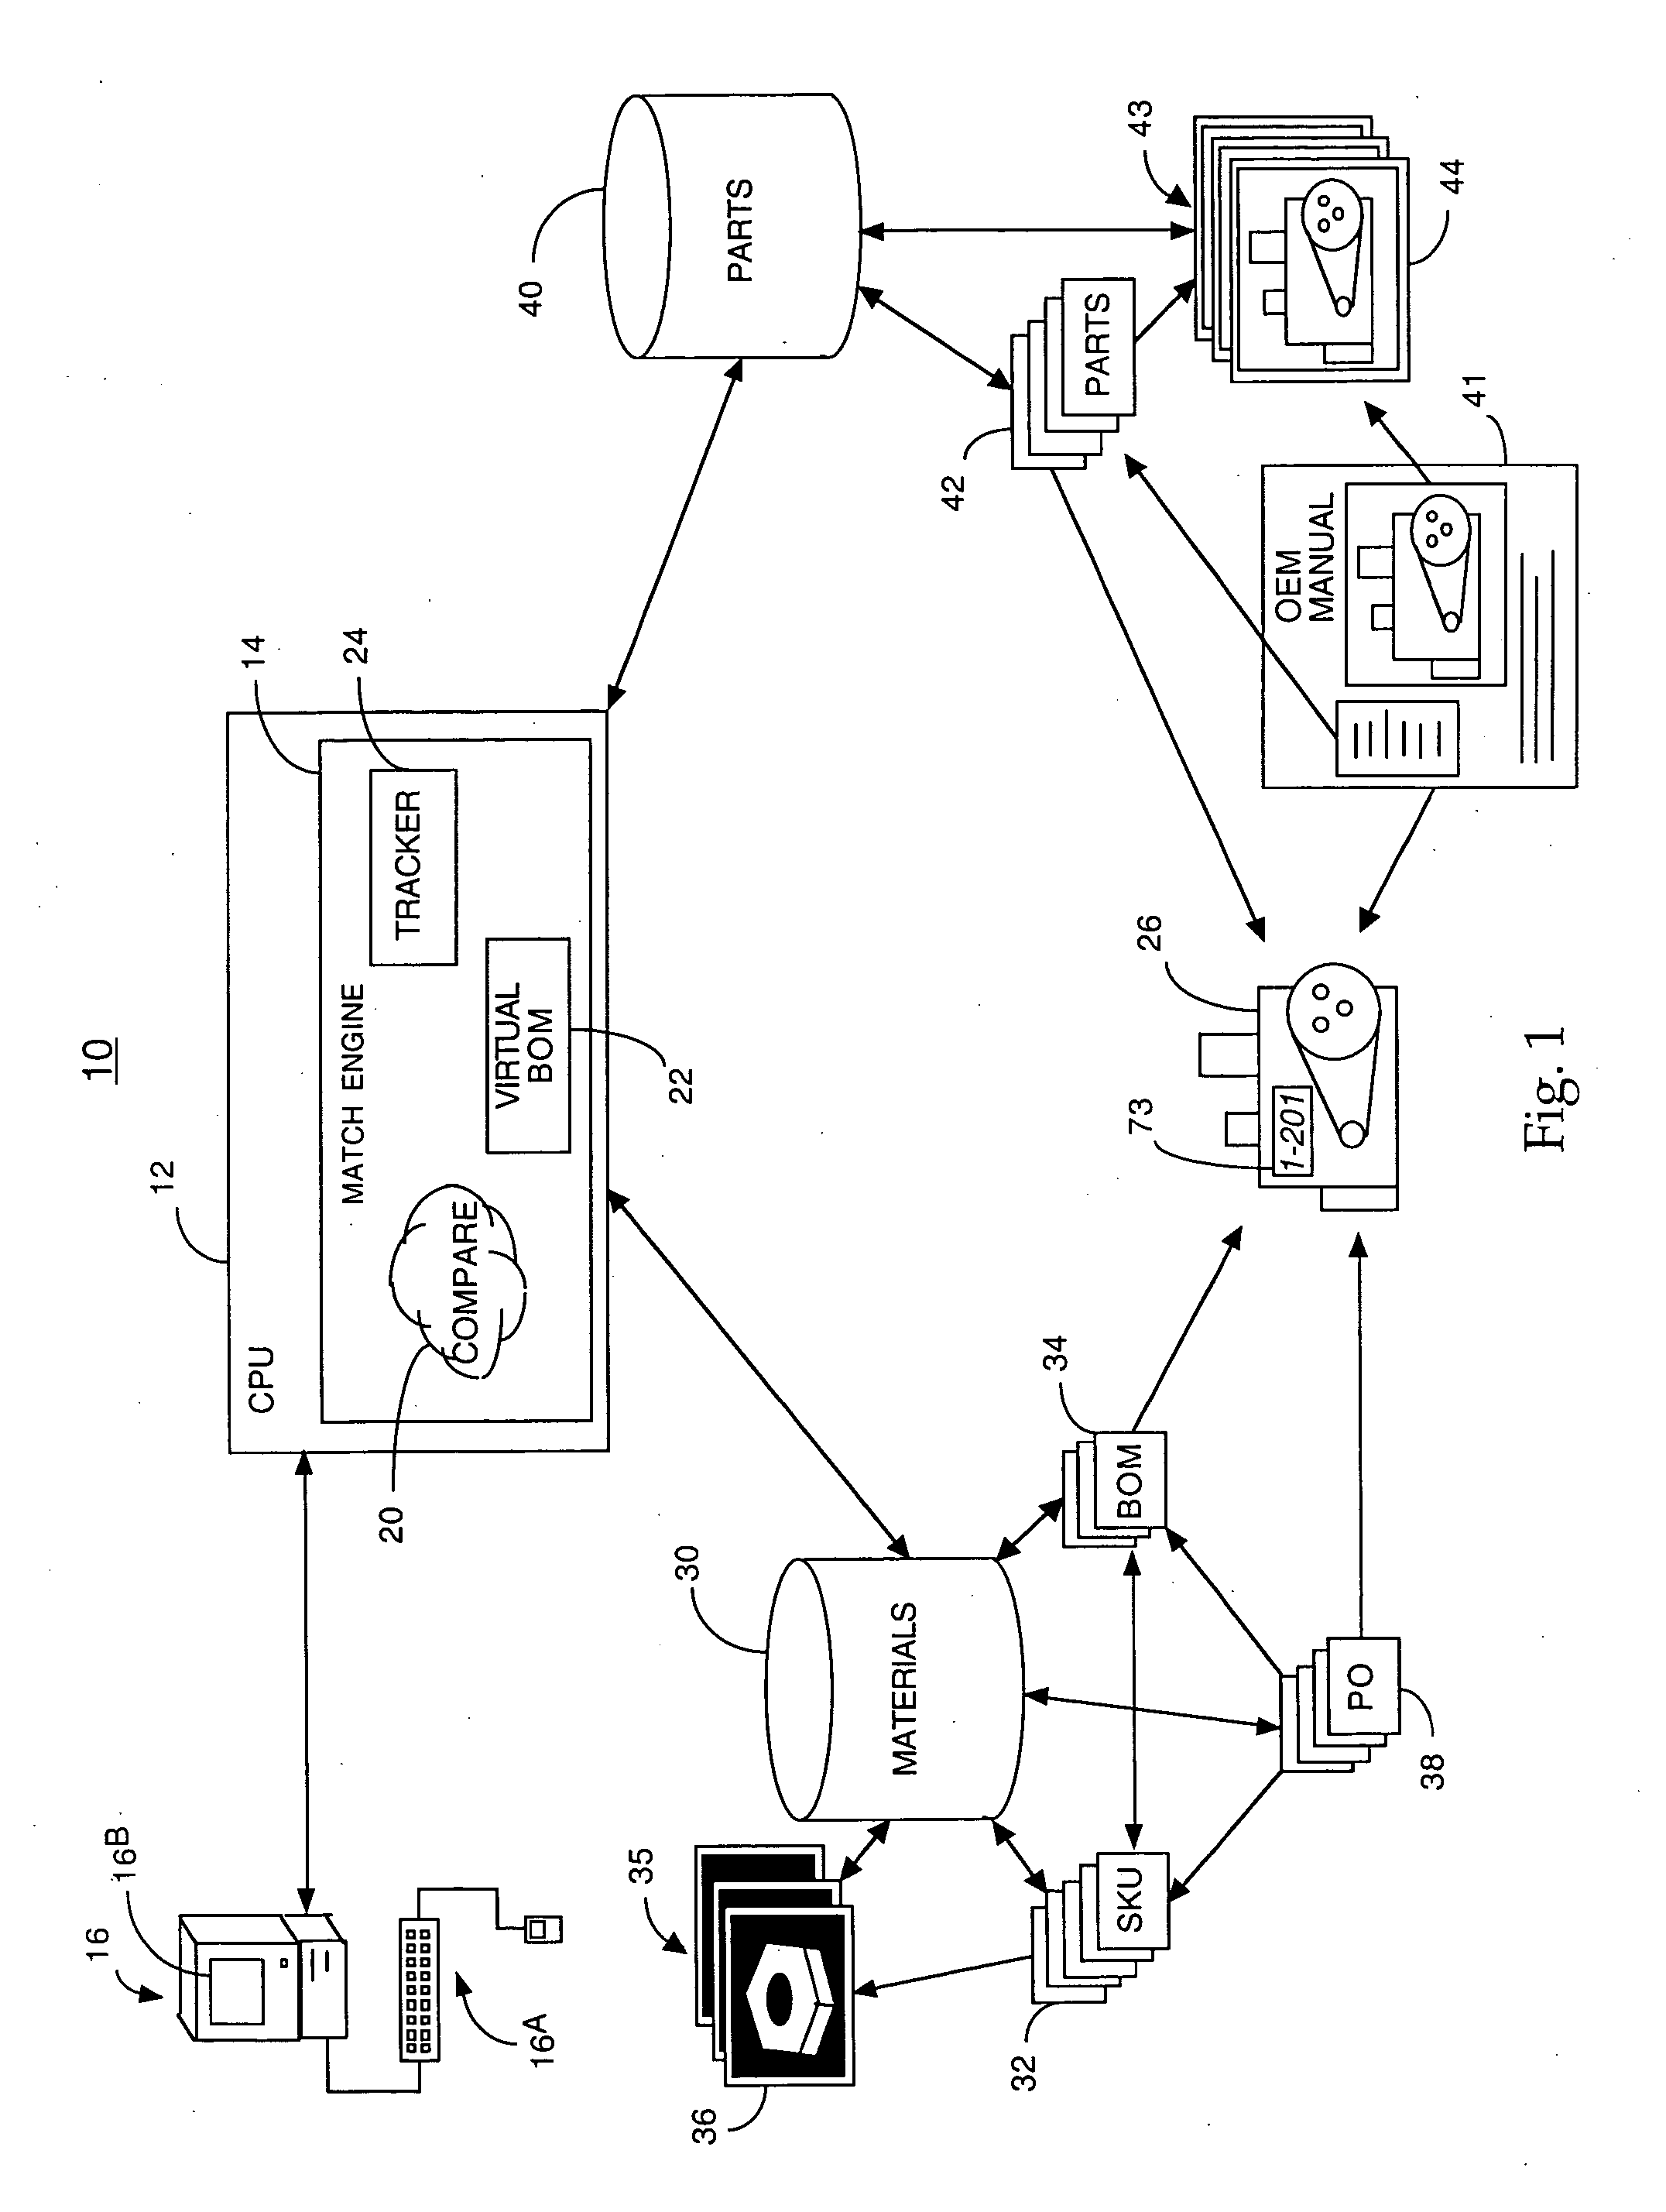 Systems and methods for the matching of materials data to parts data